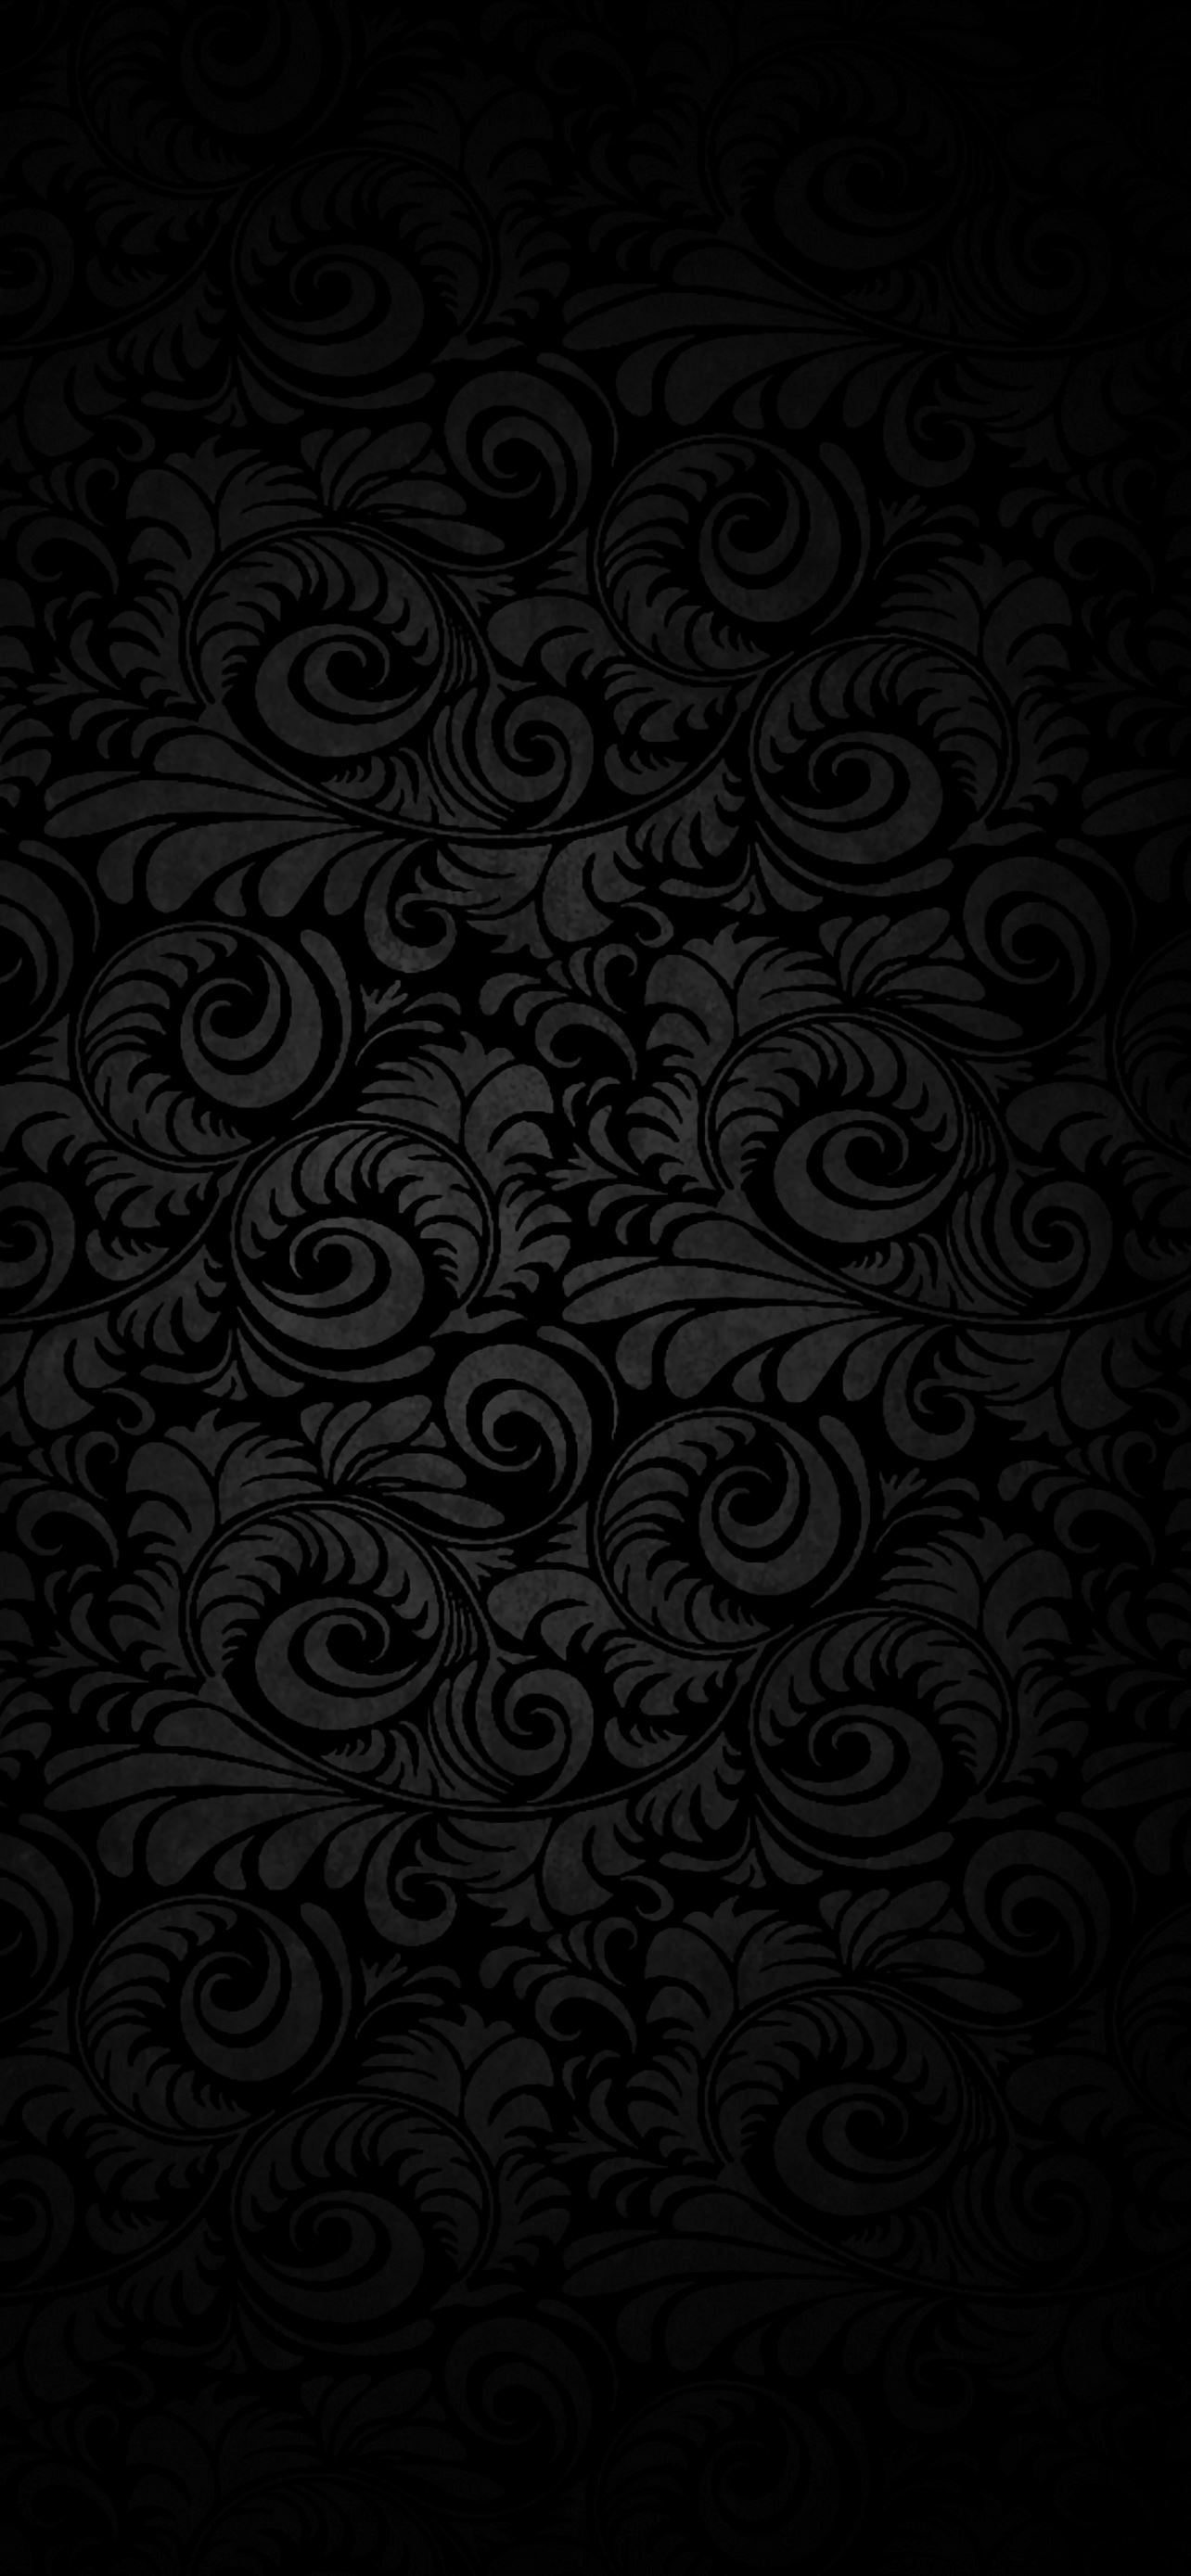 Black wallpapers for your phone, free download Black pictures